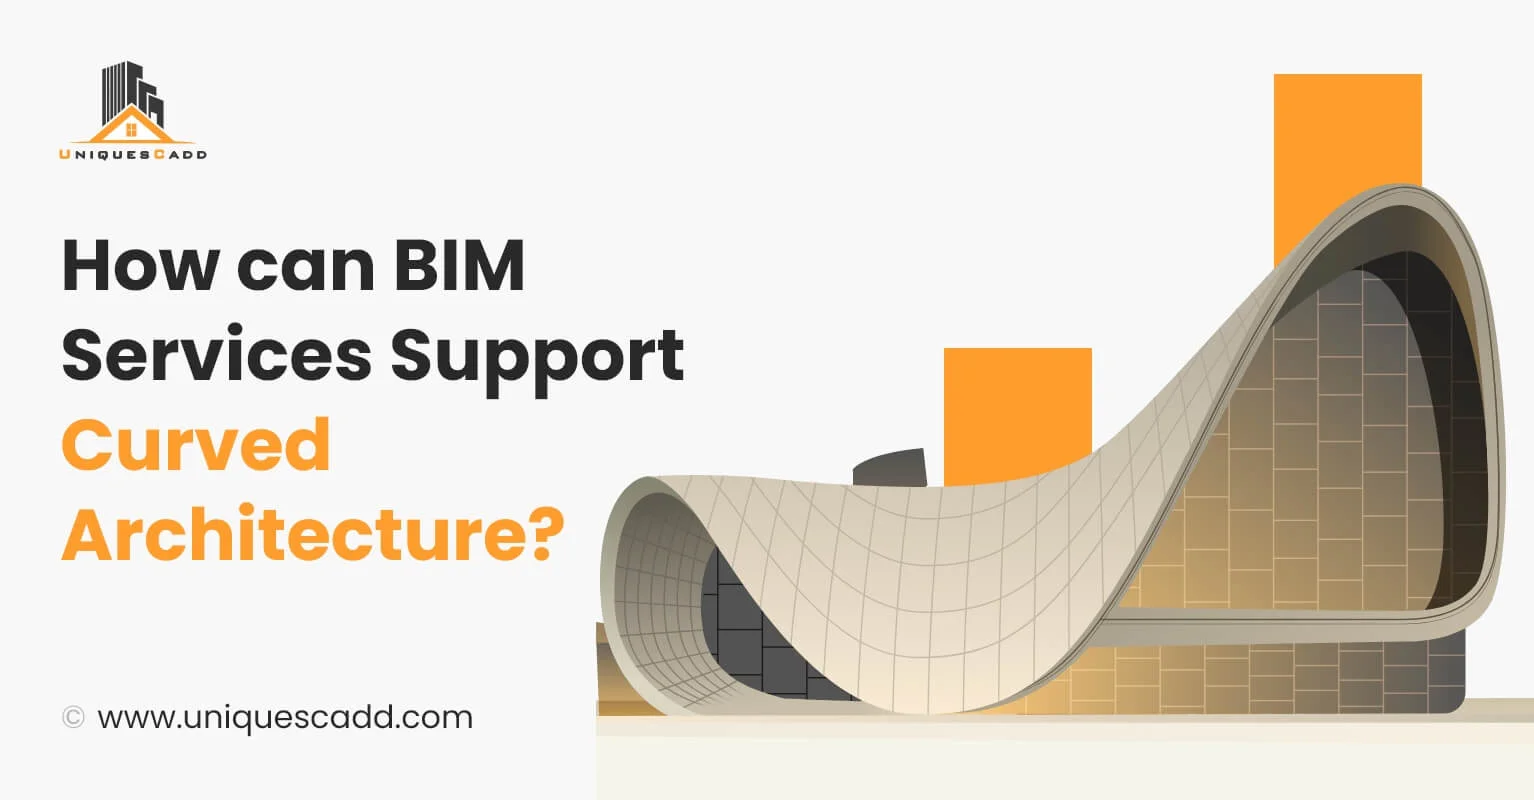 How can BIM Services Support Curved Architecture